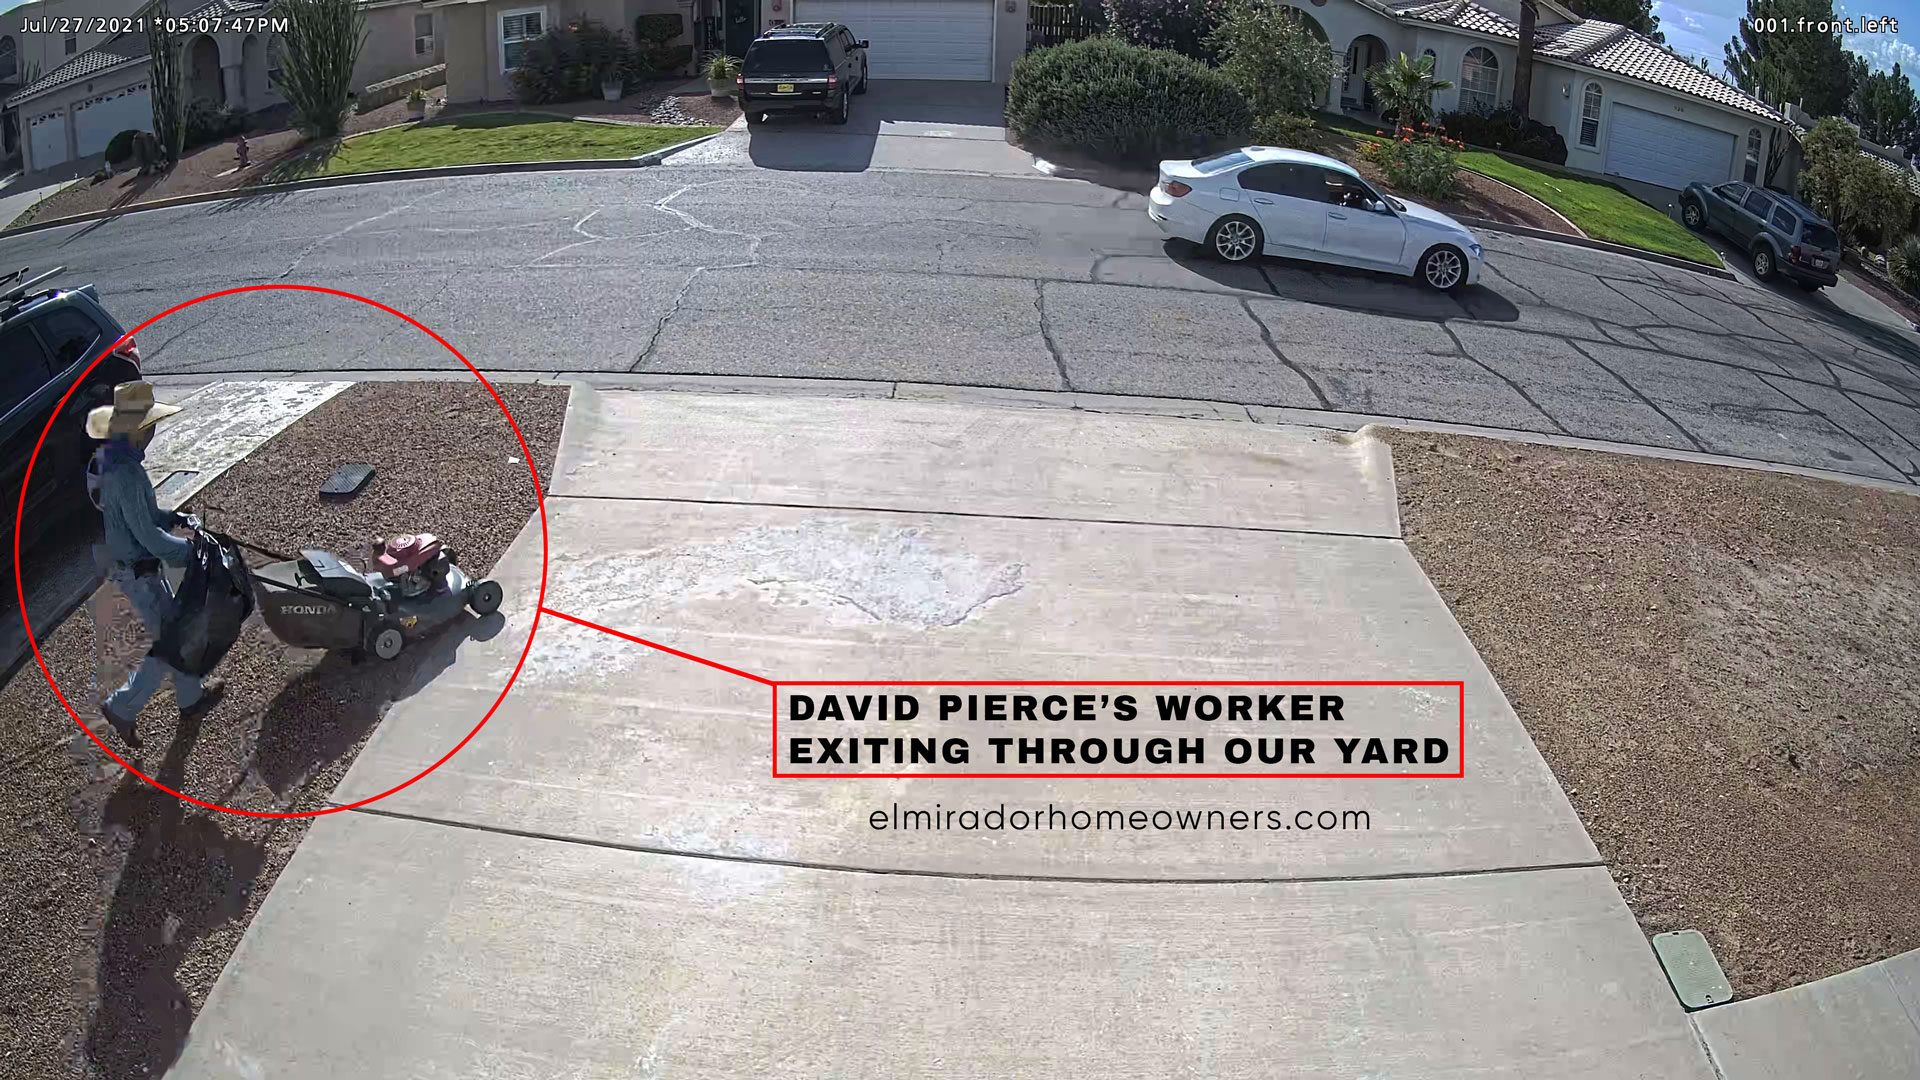 David Pierce's Worker Exiting Through Our Yard